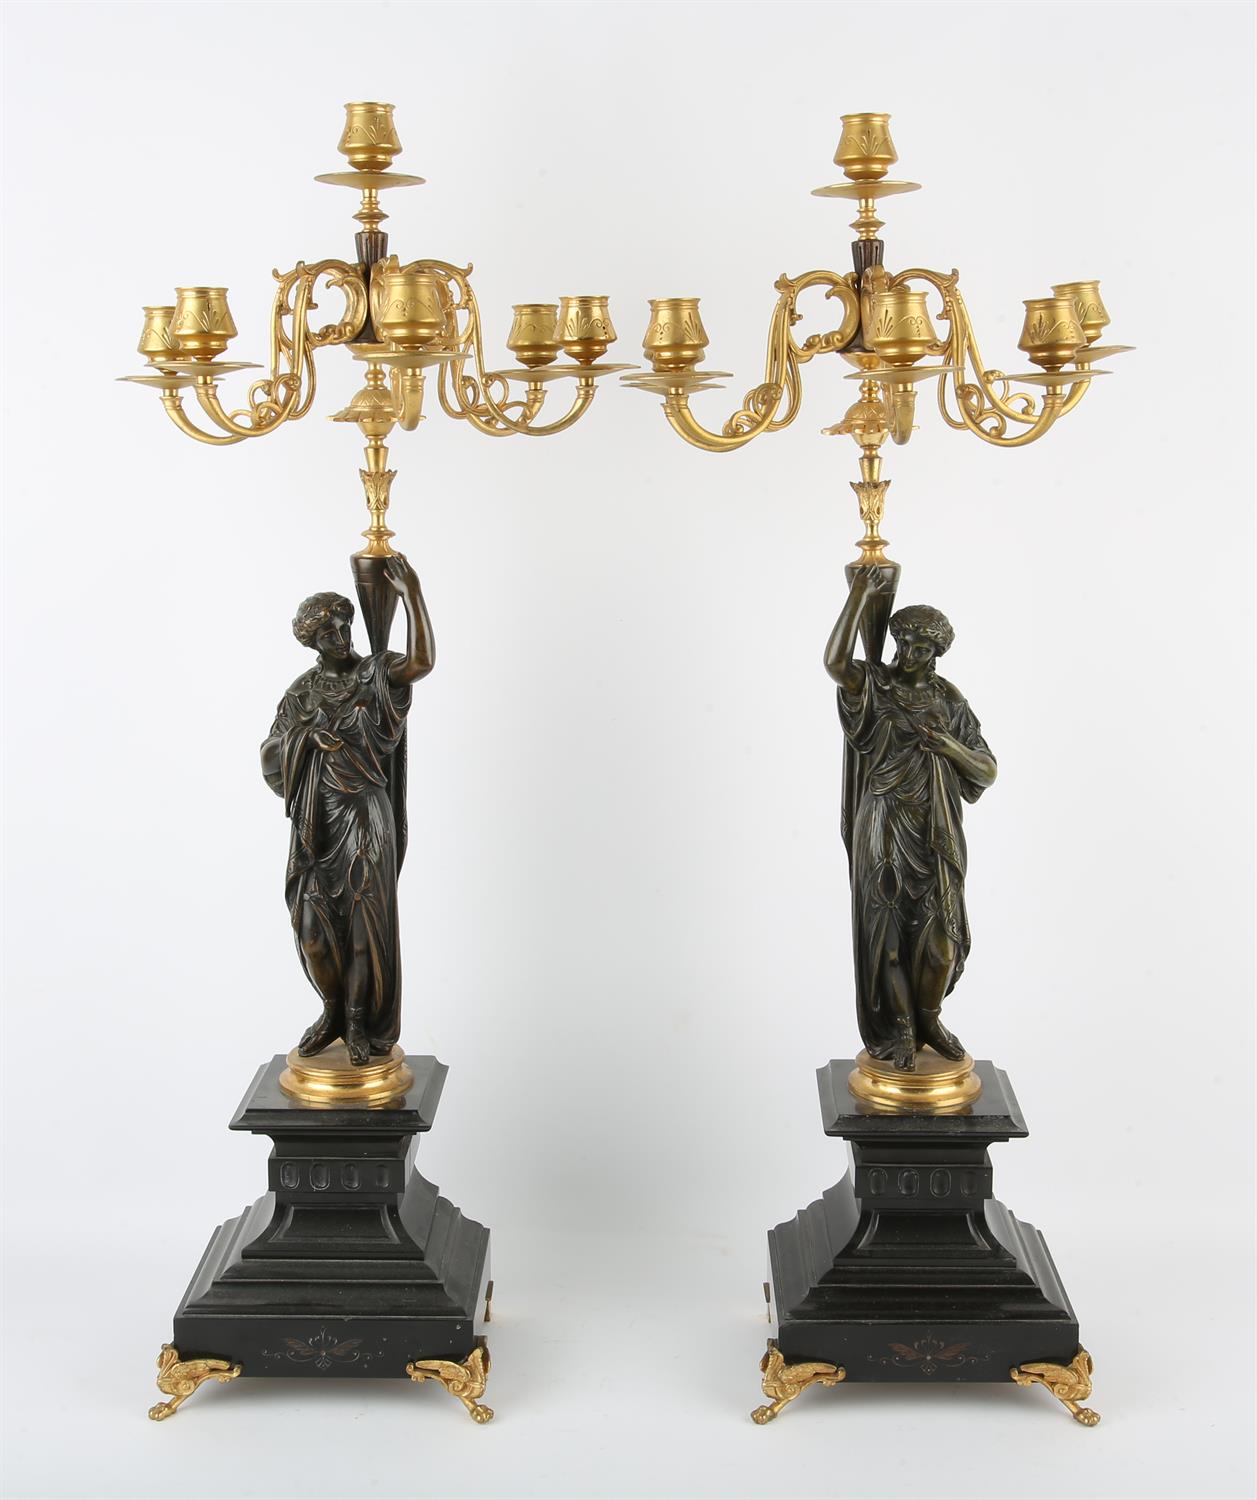 Pair of French bronze and gilt bronze six light candelabra, late 19th Century, in the form of two